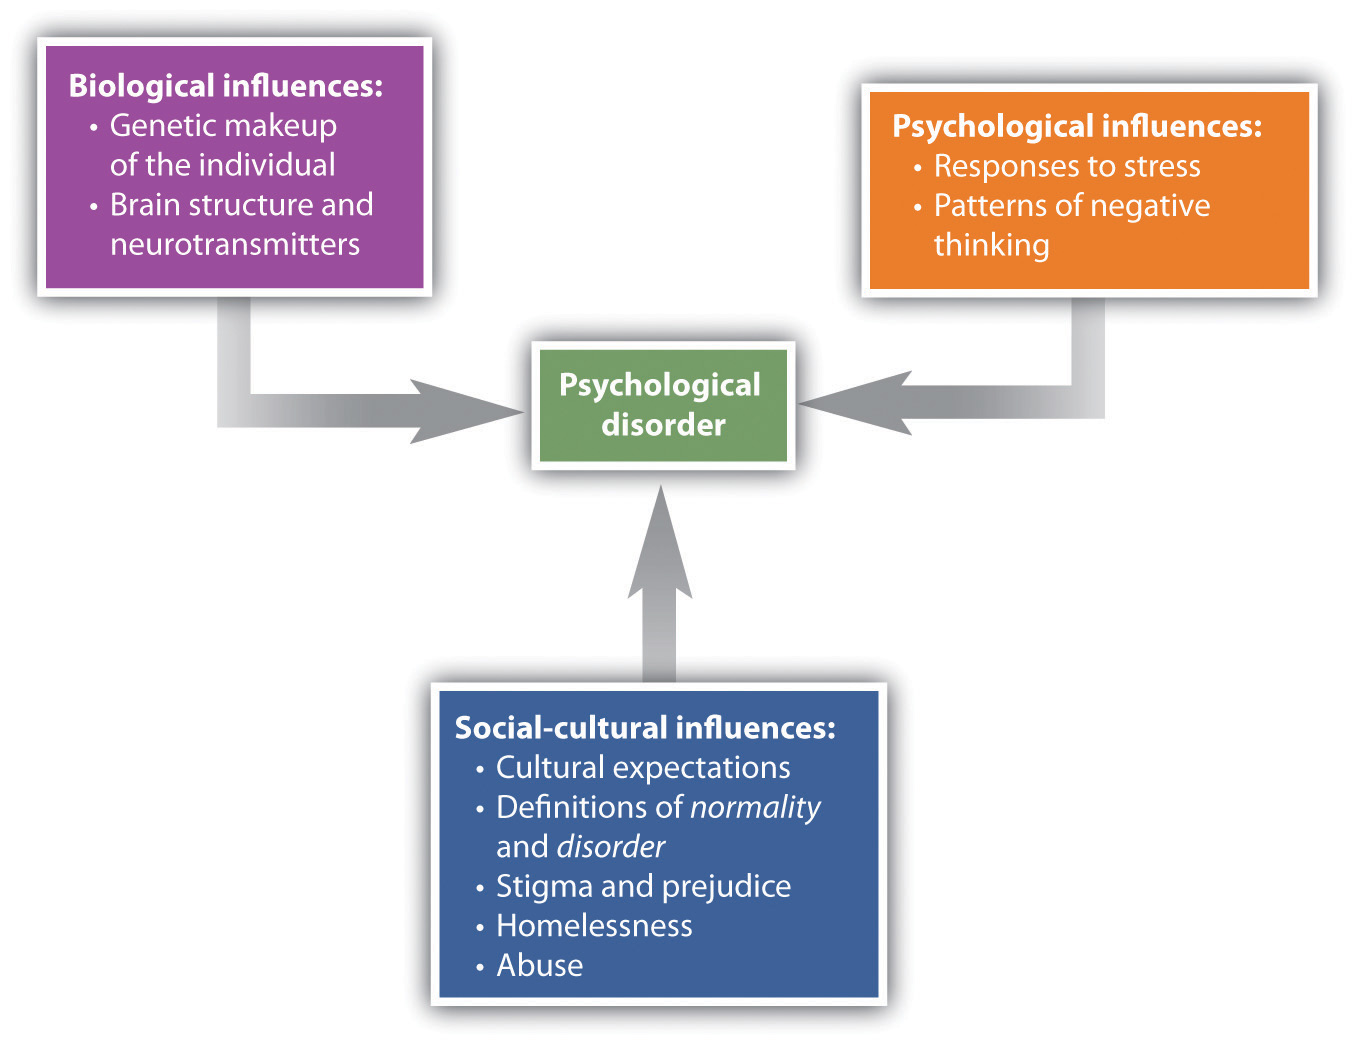 13.1 psychological disorder: what makes a behaviour abnormal